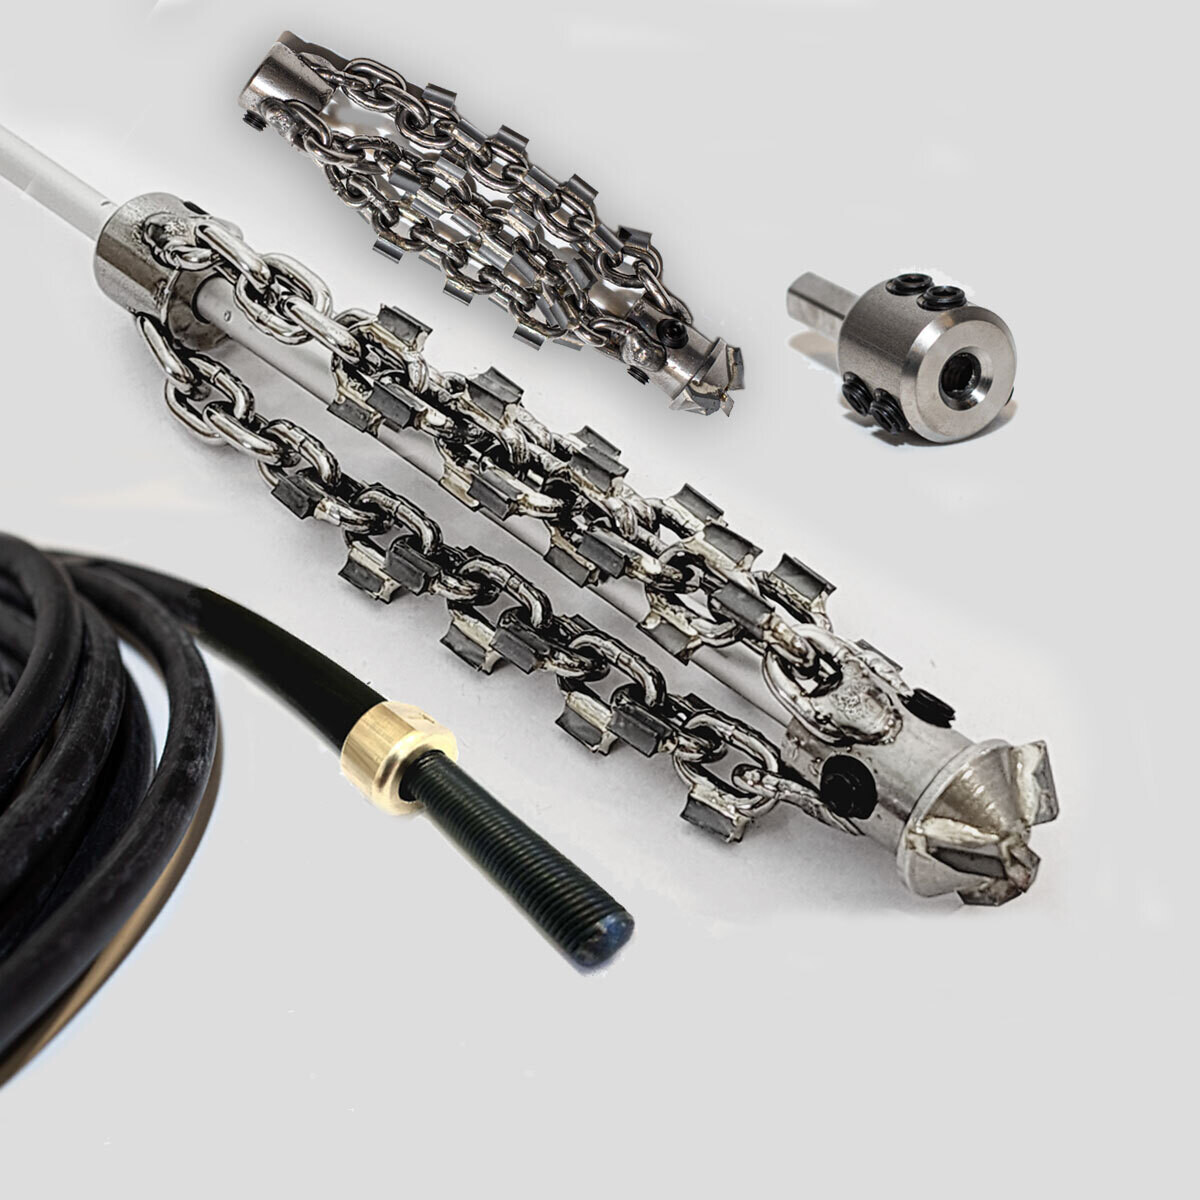 Steel drain chain with drill head and hard metal tips.